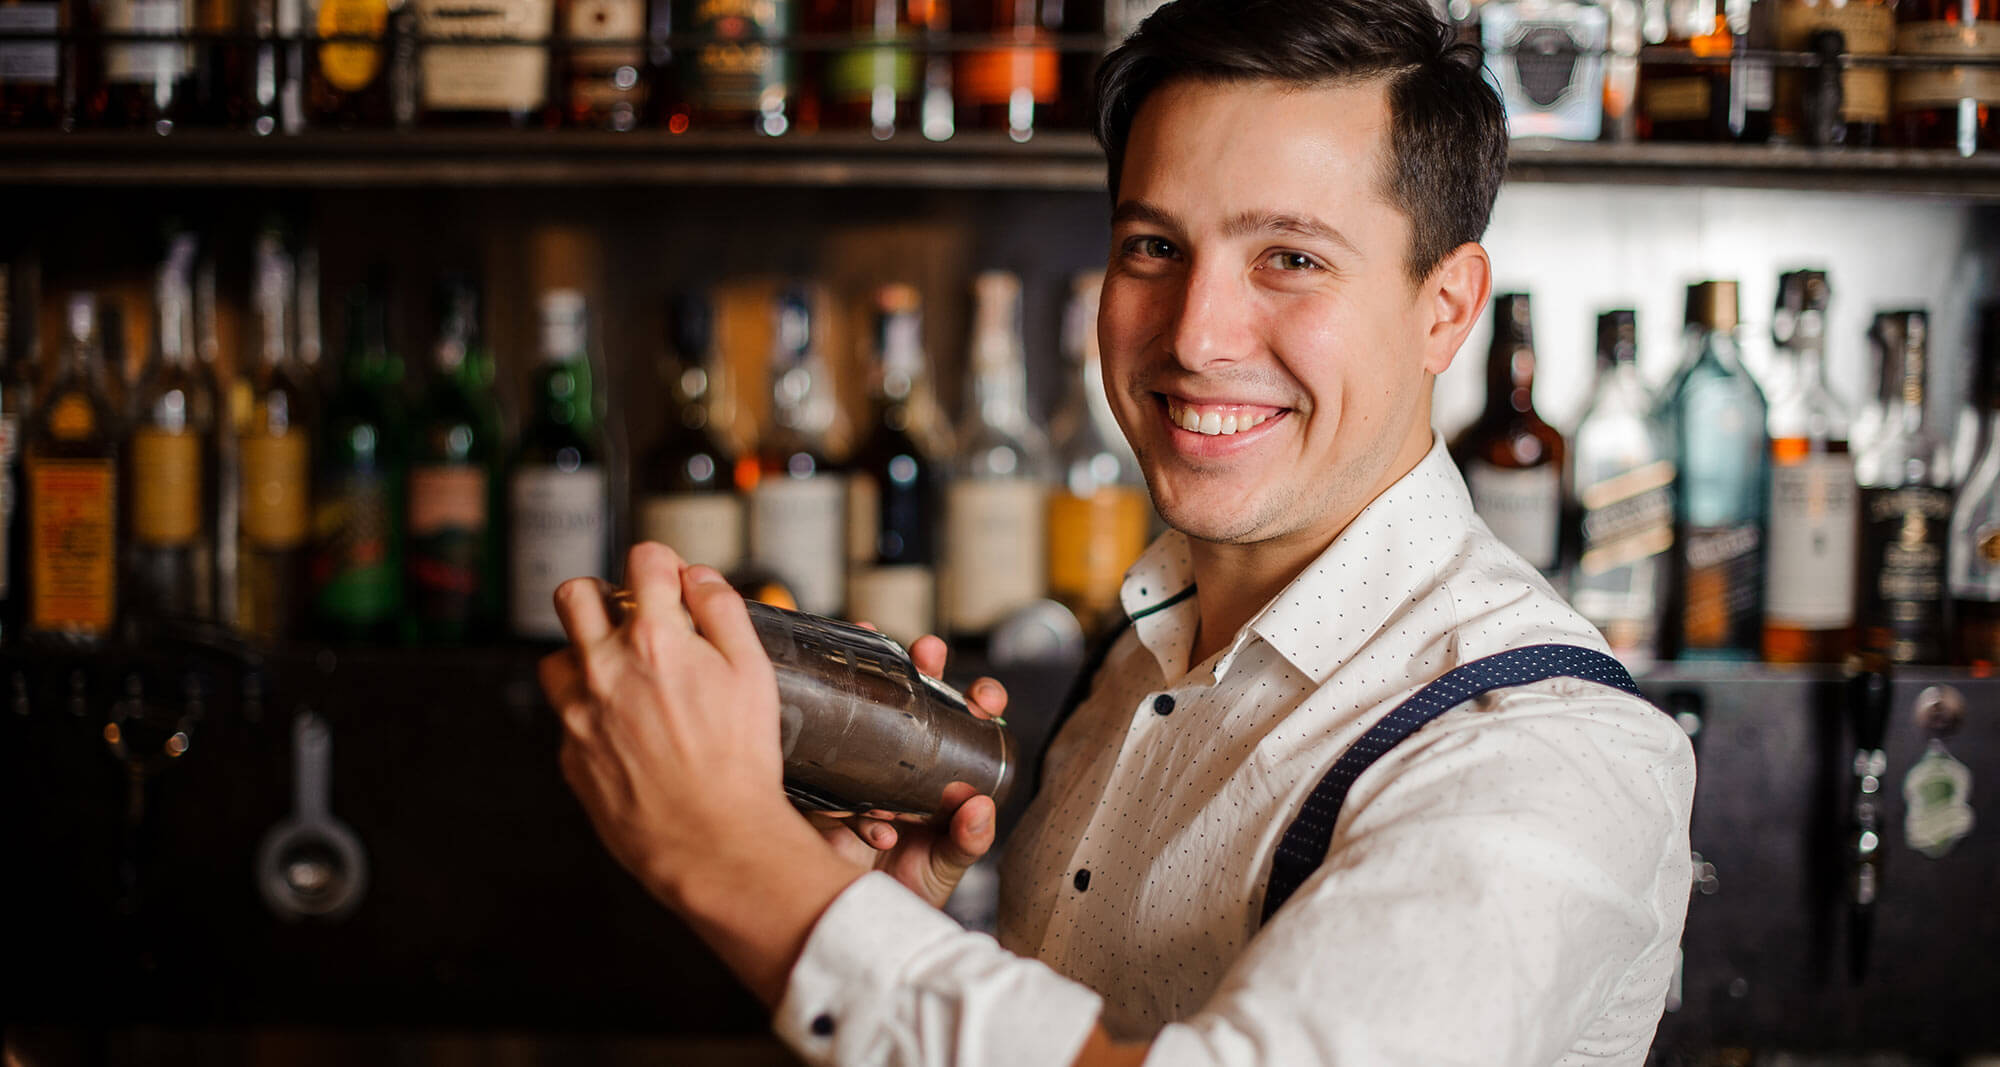 Travel The World As A Bartender (and Improve Your Career)